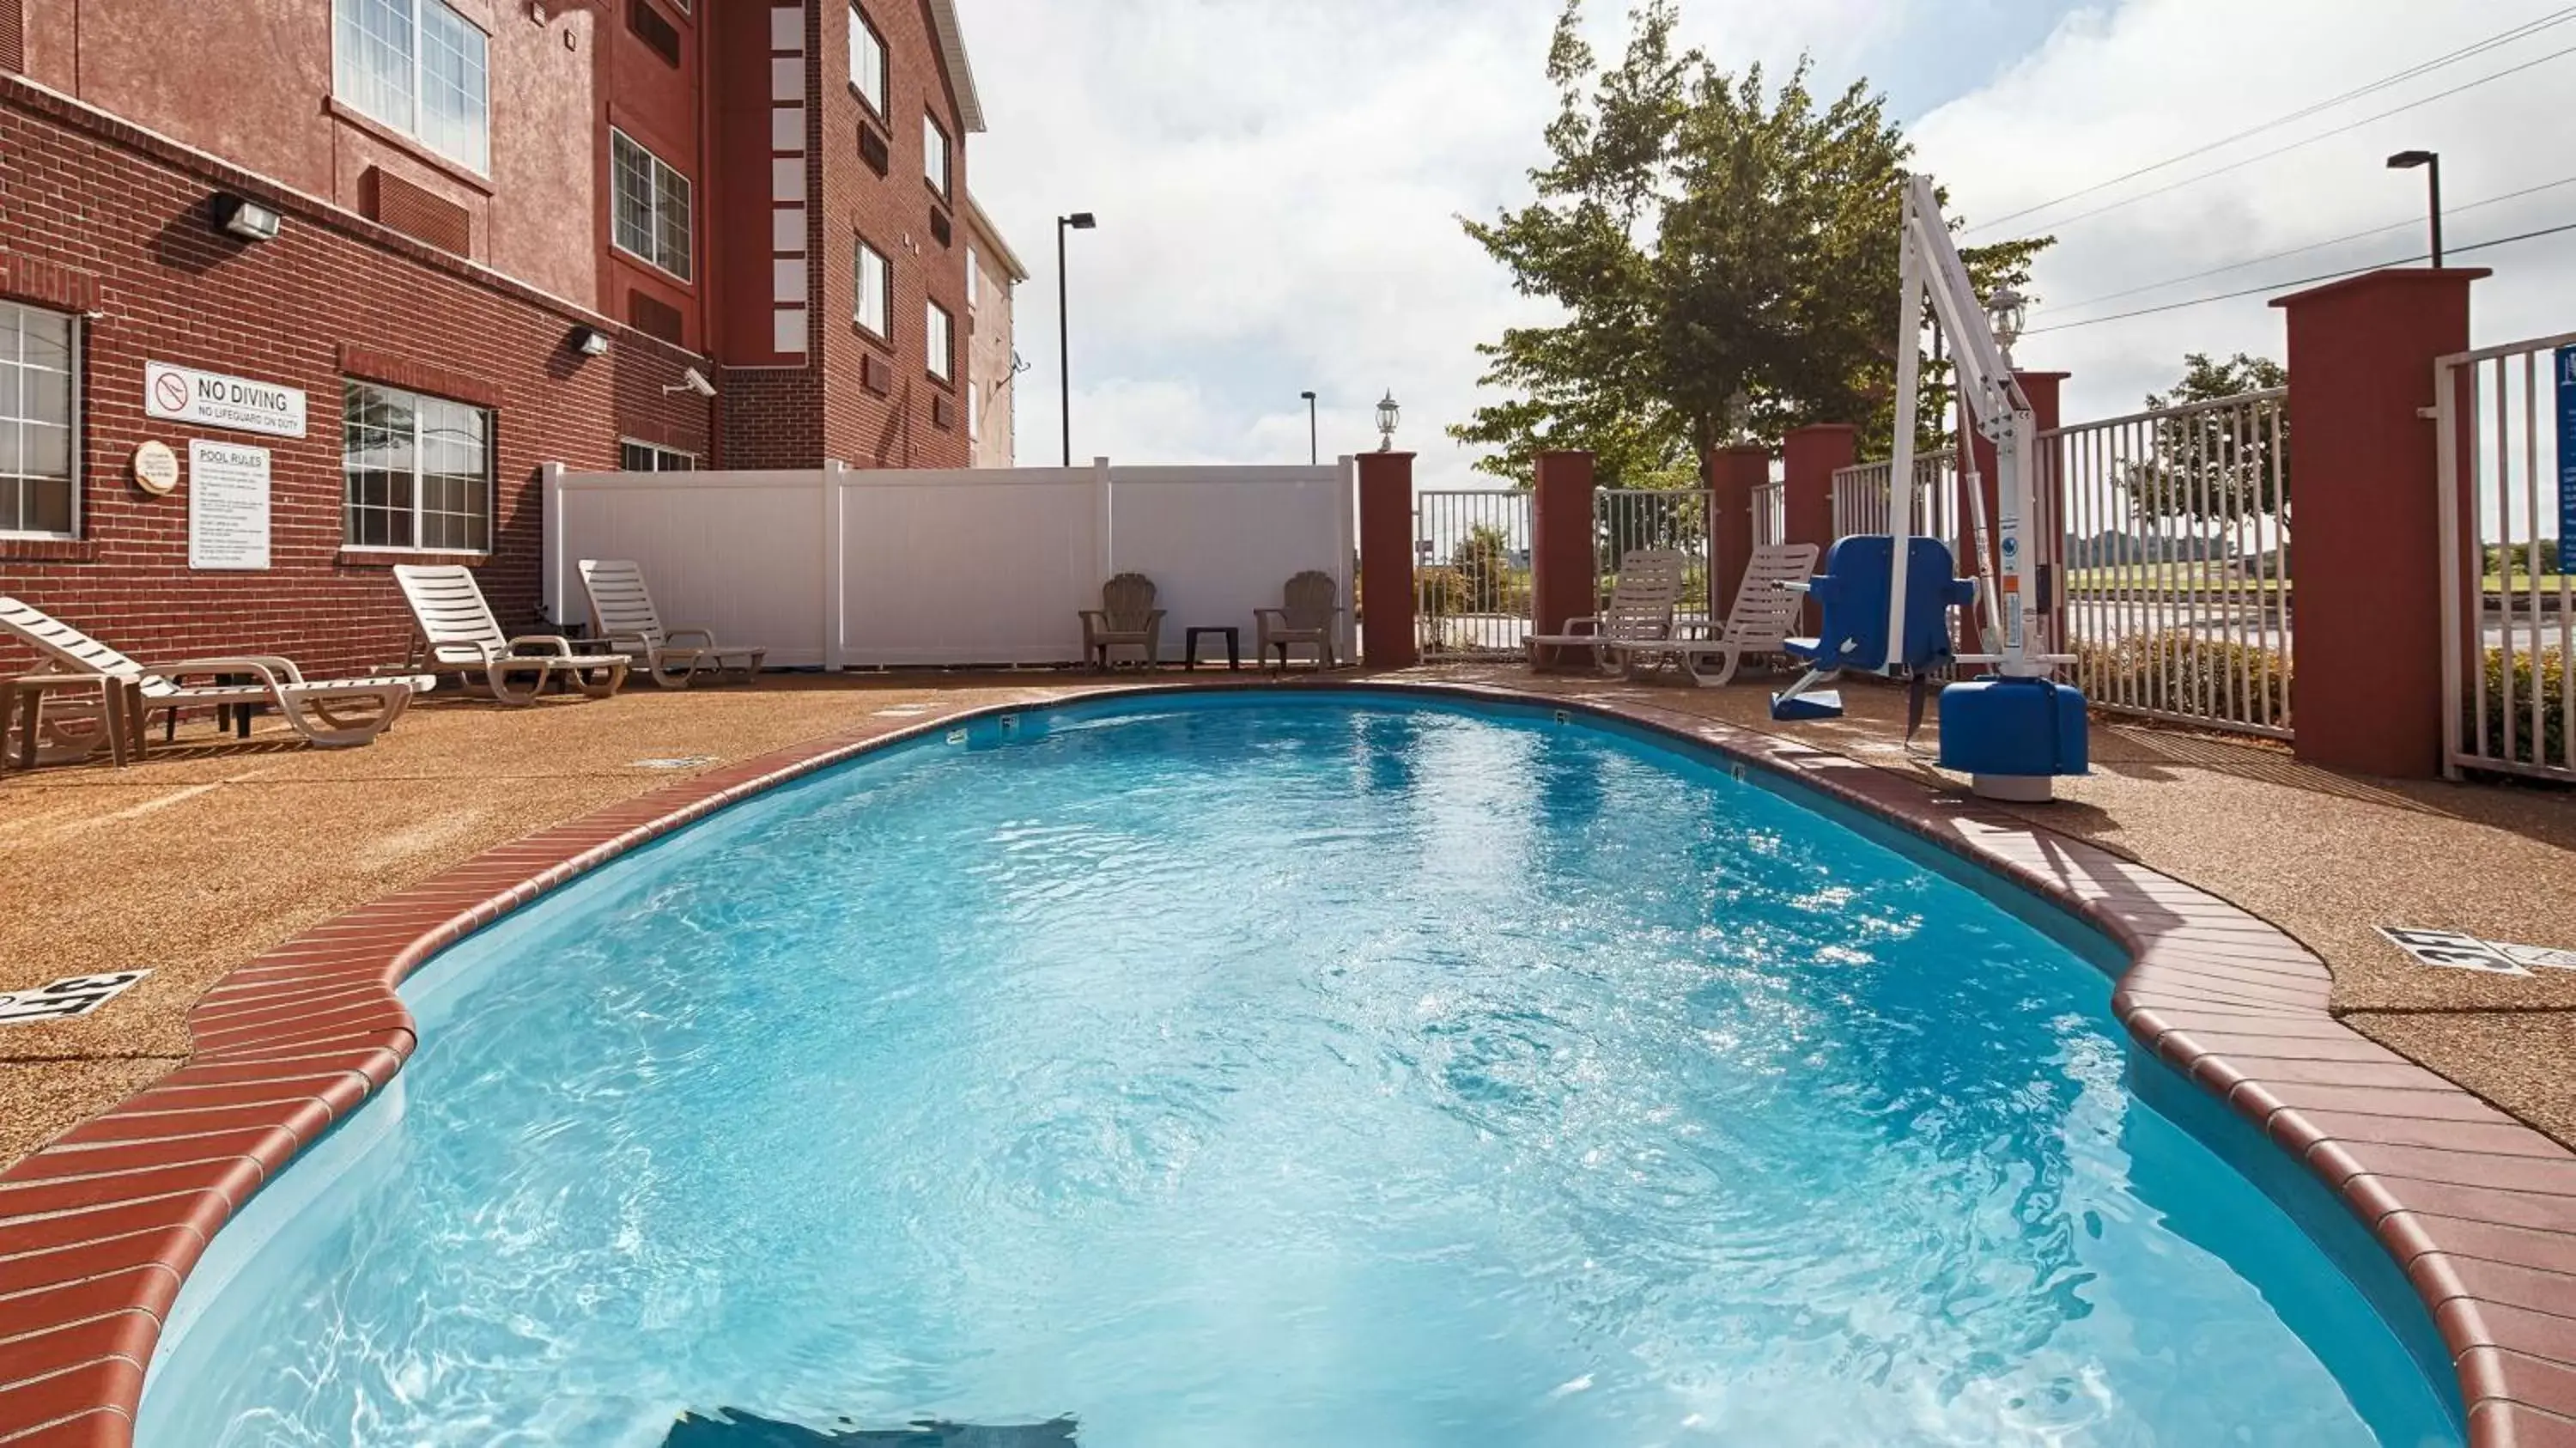 On site, Swimming Pool in Best Western Plus Olive Branch Hotel & Suites